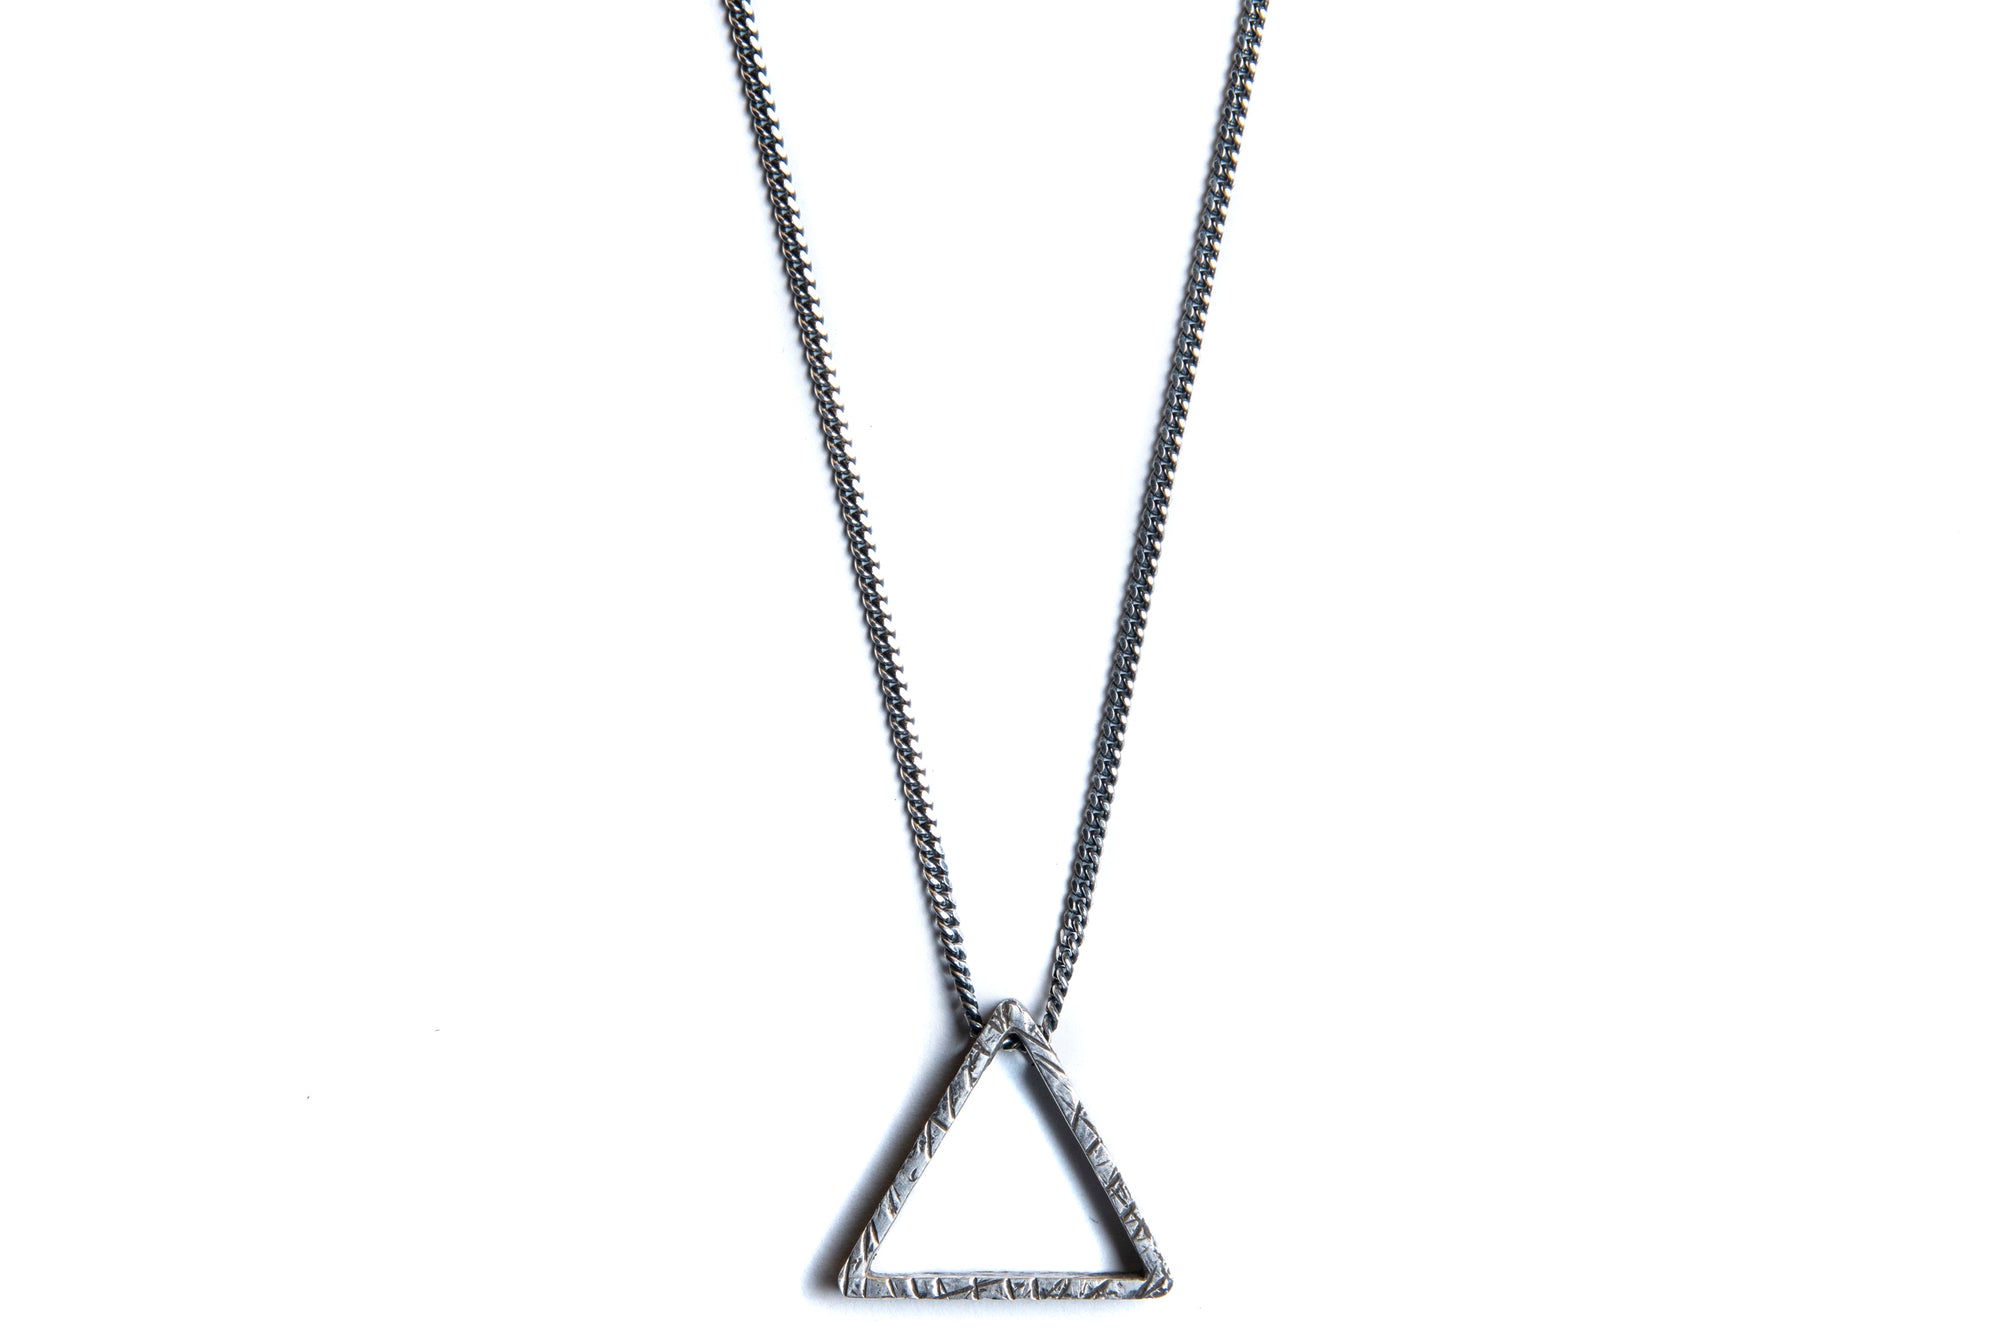 FIRE TRIANGLE NECKLACE